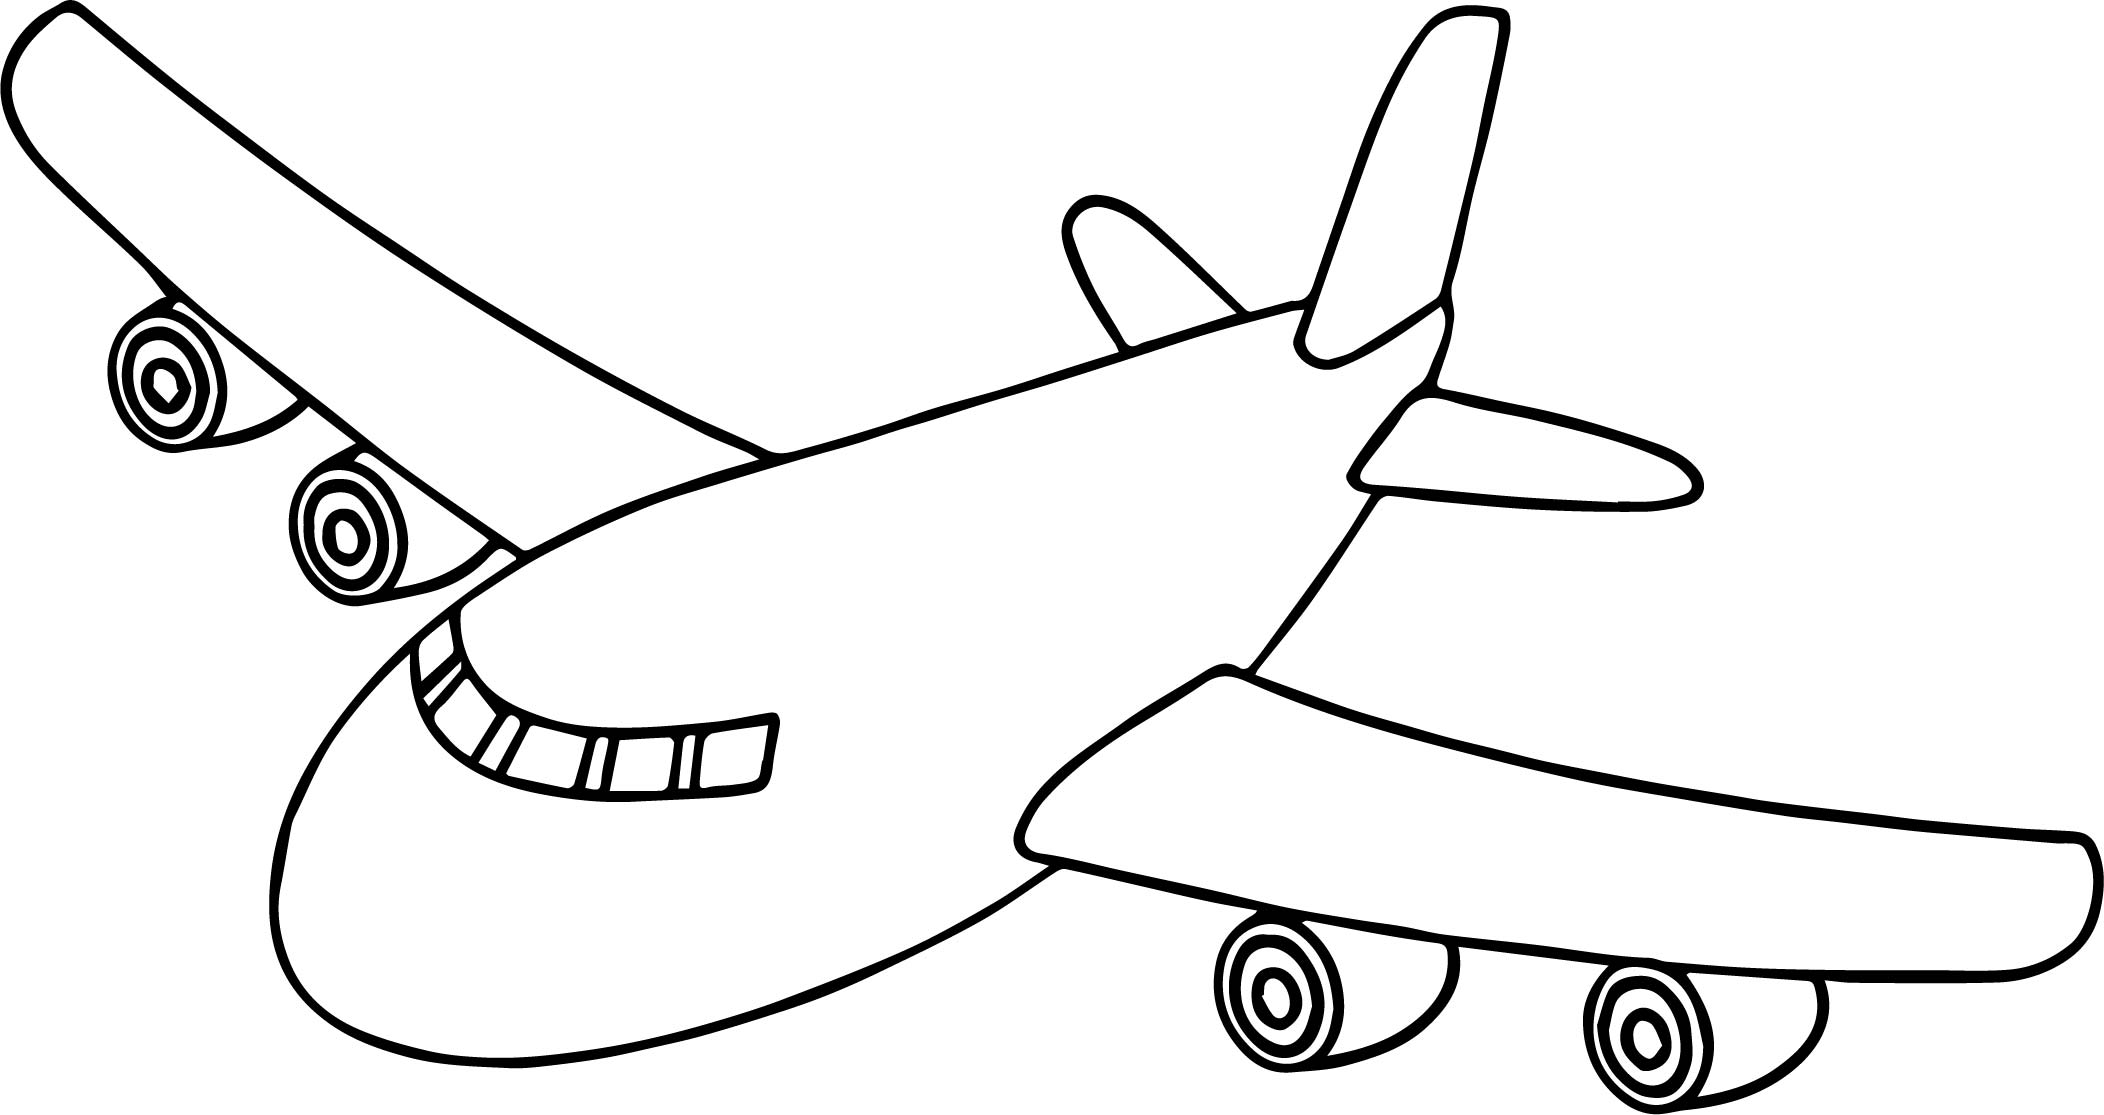 Front Airplane Coloring Page | Wecoloringpage.com